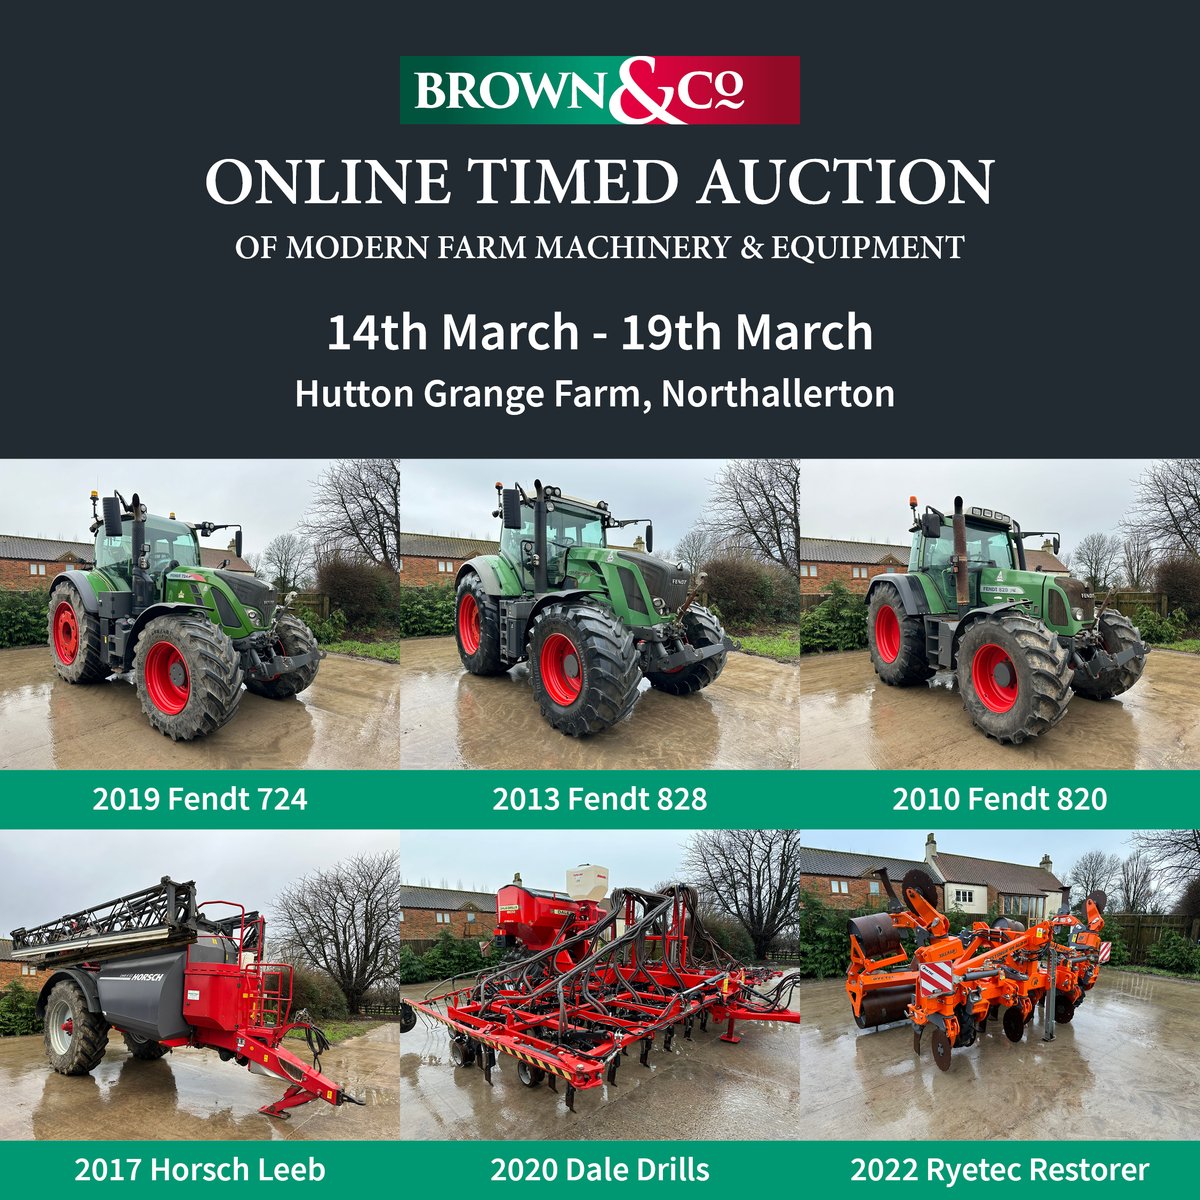 #machinerymonday This week we have 3 modern Fendt tractors, a 2017 Horsch Leeb sprayer, 2020 Dale Drills Eco, and a 2022 Ryetec Restorer for sale. Bidding starts this Thurs 14th March and closes Tues 19th March from 12pm. To view more, visit: bit.ly/4c4dEvf